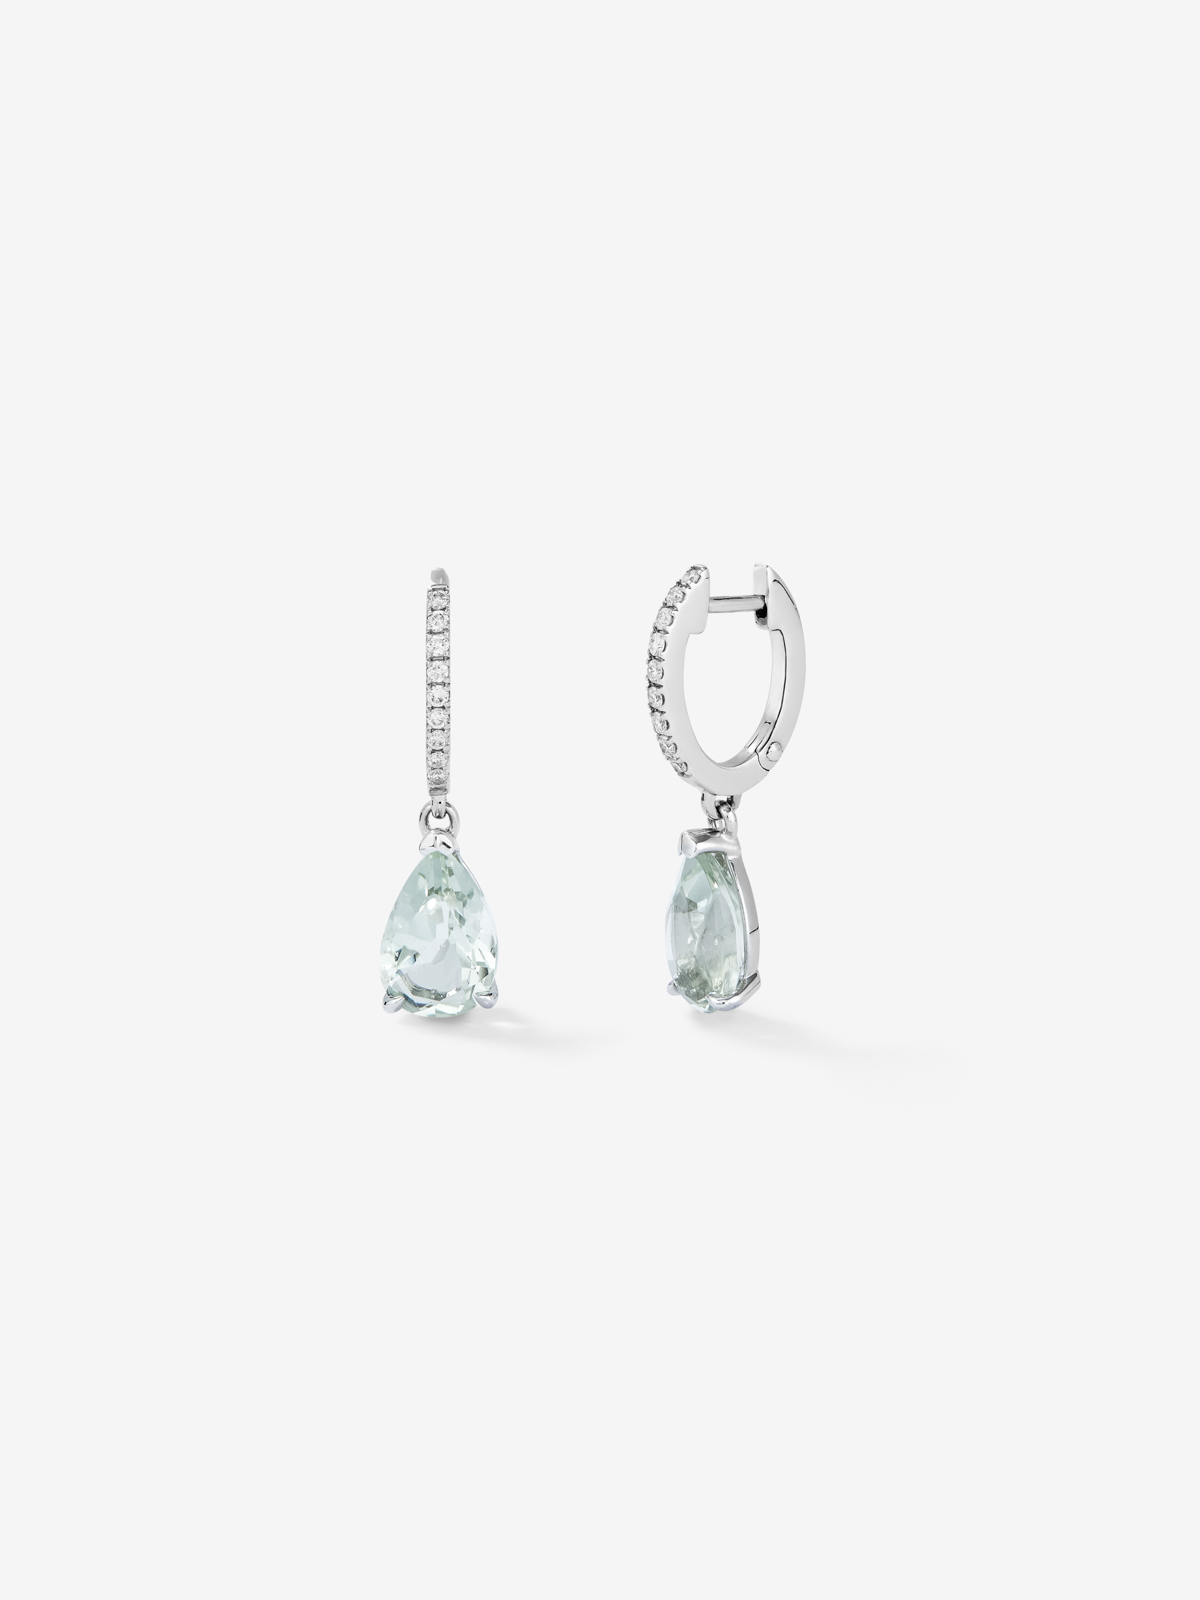 18K white gold hoop earrings with green amethyst and diamond pendant